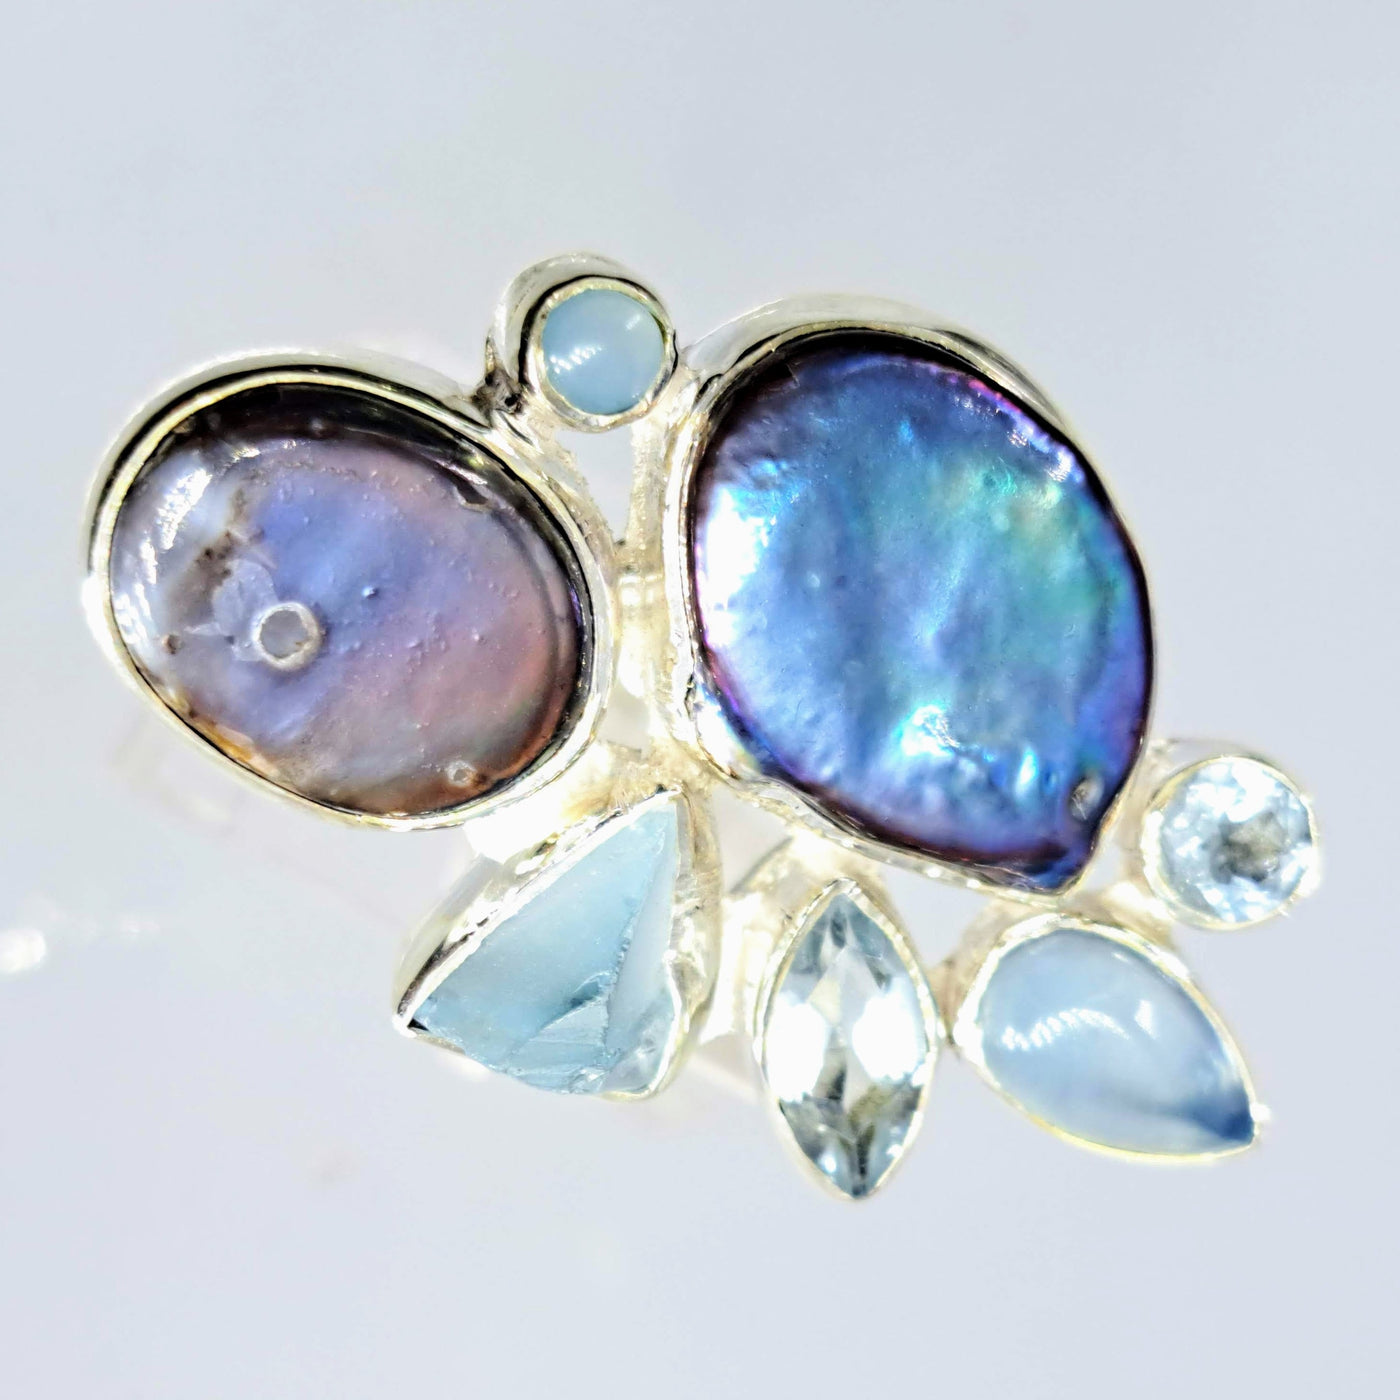 "Pretty As A Peacock" Sz 9 Ring - Pearl, Chalcedony, Aquamarine, Topaz, Sterling